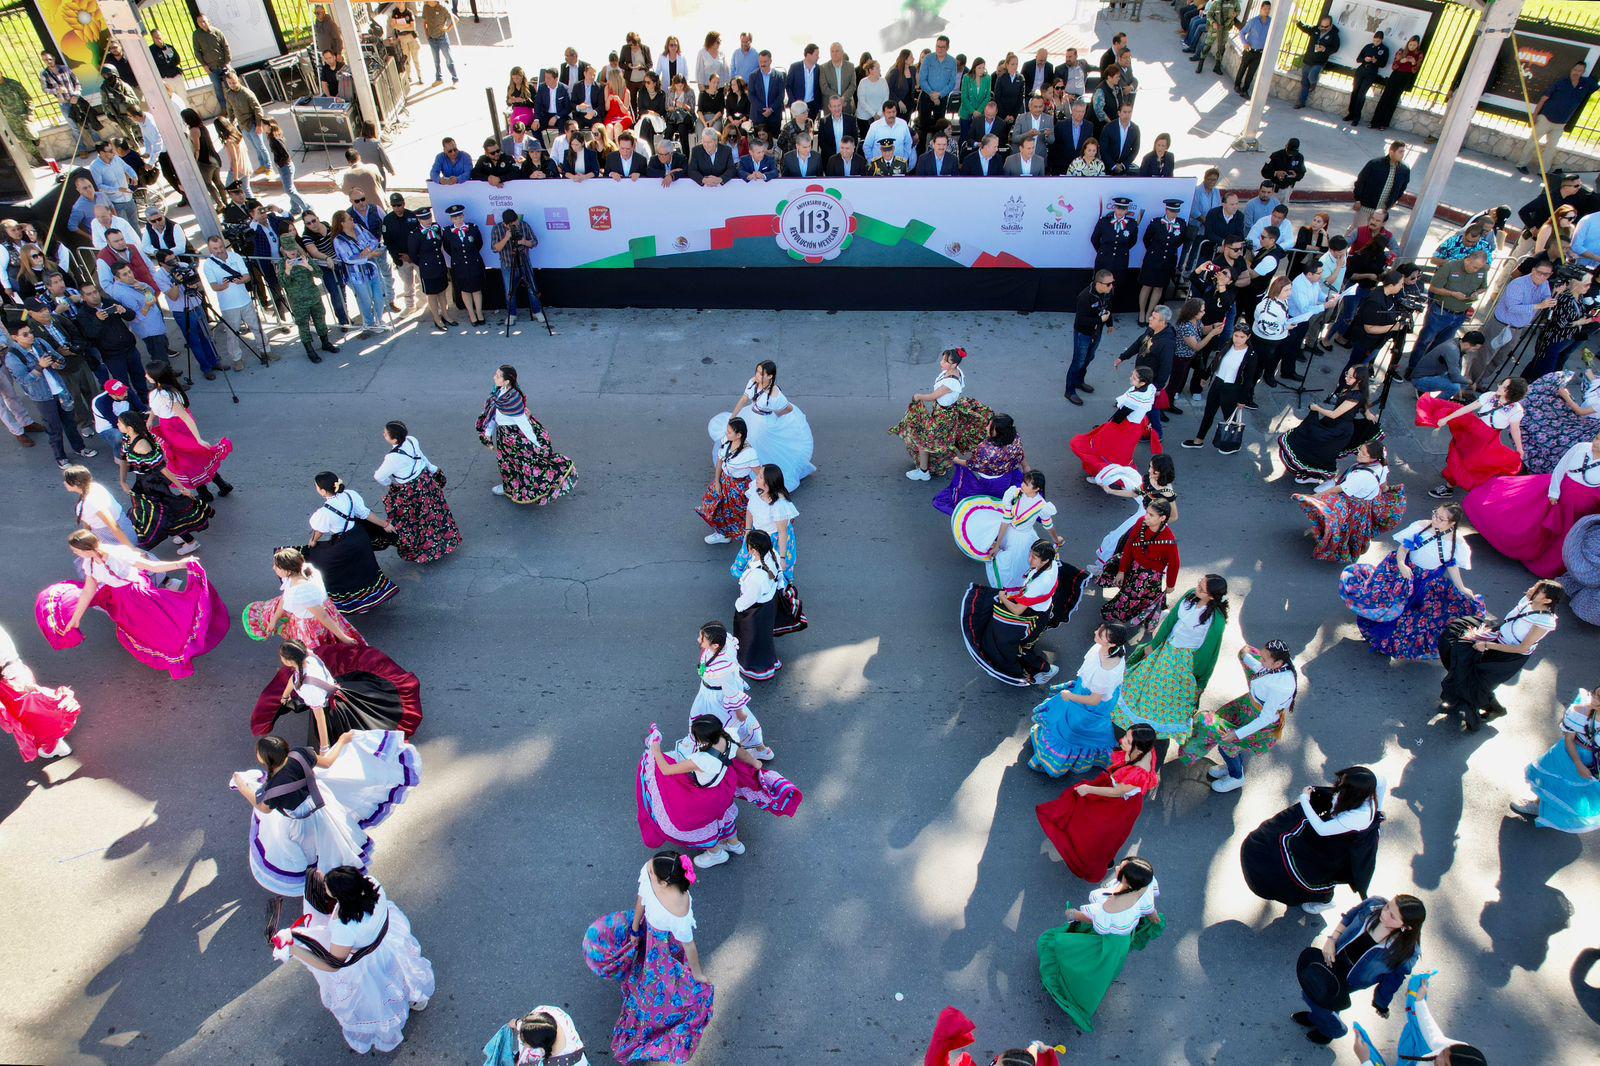 $!The column of the Saltillo parade began the commemorative festivities of the 113th Anniversary of the Mexican Revolution at 10:00 am.